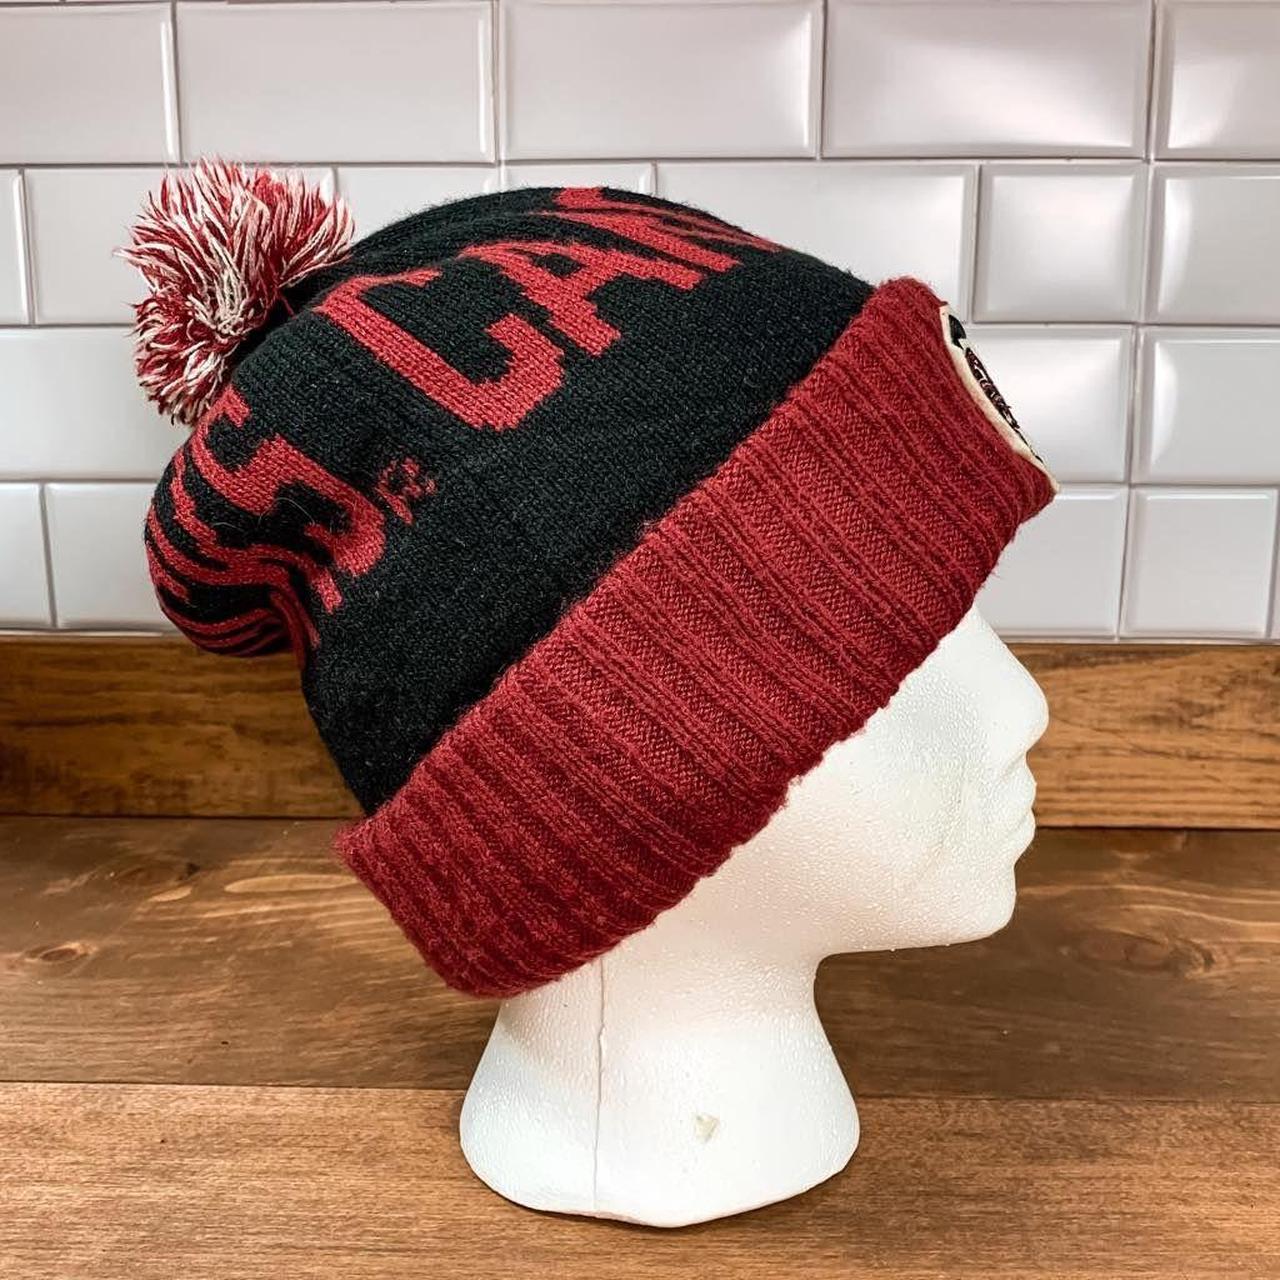 Picturing a SC Gamecocks Pom Beanie by Adidas... - Depop